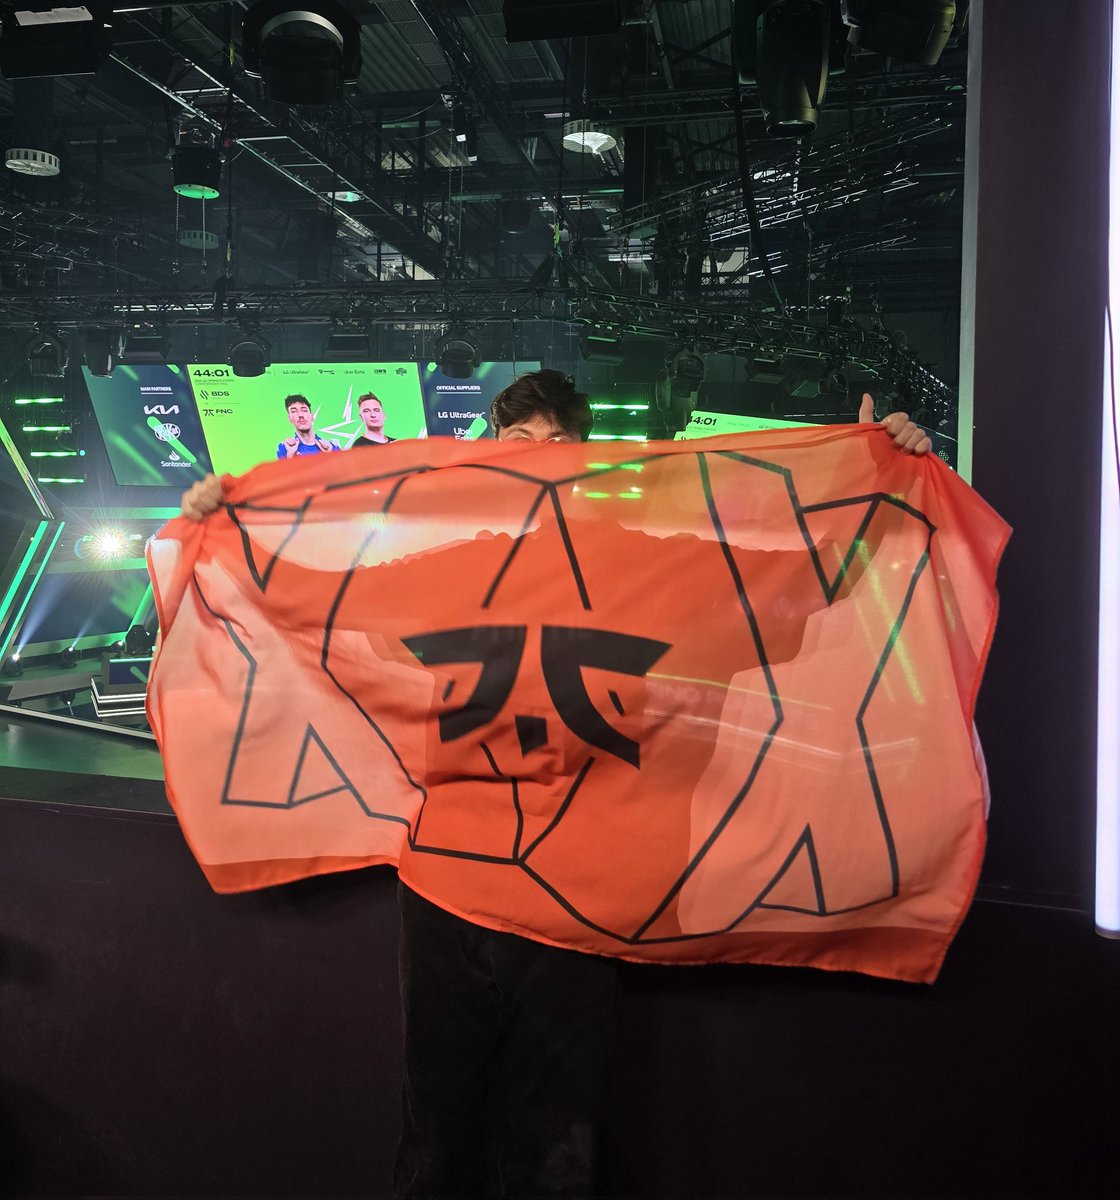 LAST BEST OF 5 TO MAKE IT TO MSI FNC VS BDS LIVE RIGHT FUCKING NOW IN THE STUDIO GET THE FUCK IN HEREEEEEE IF YOU WANT A FLAG LIKE MINE CHECK OUT THE STORE fna.tc/caedrel #ad